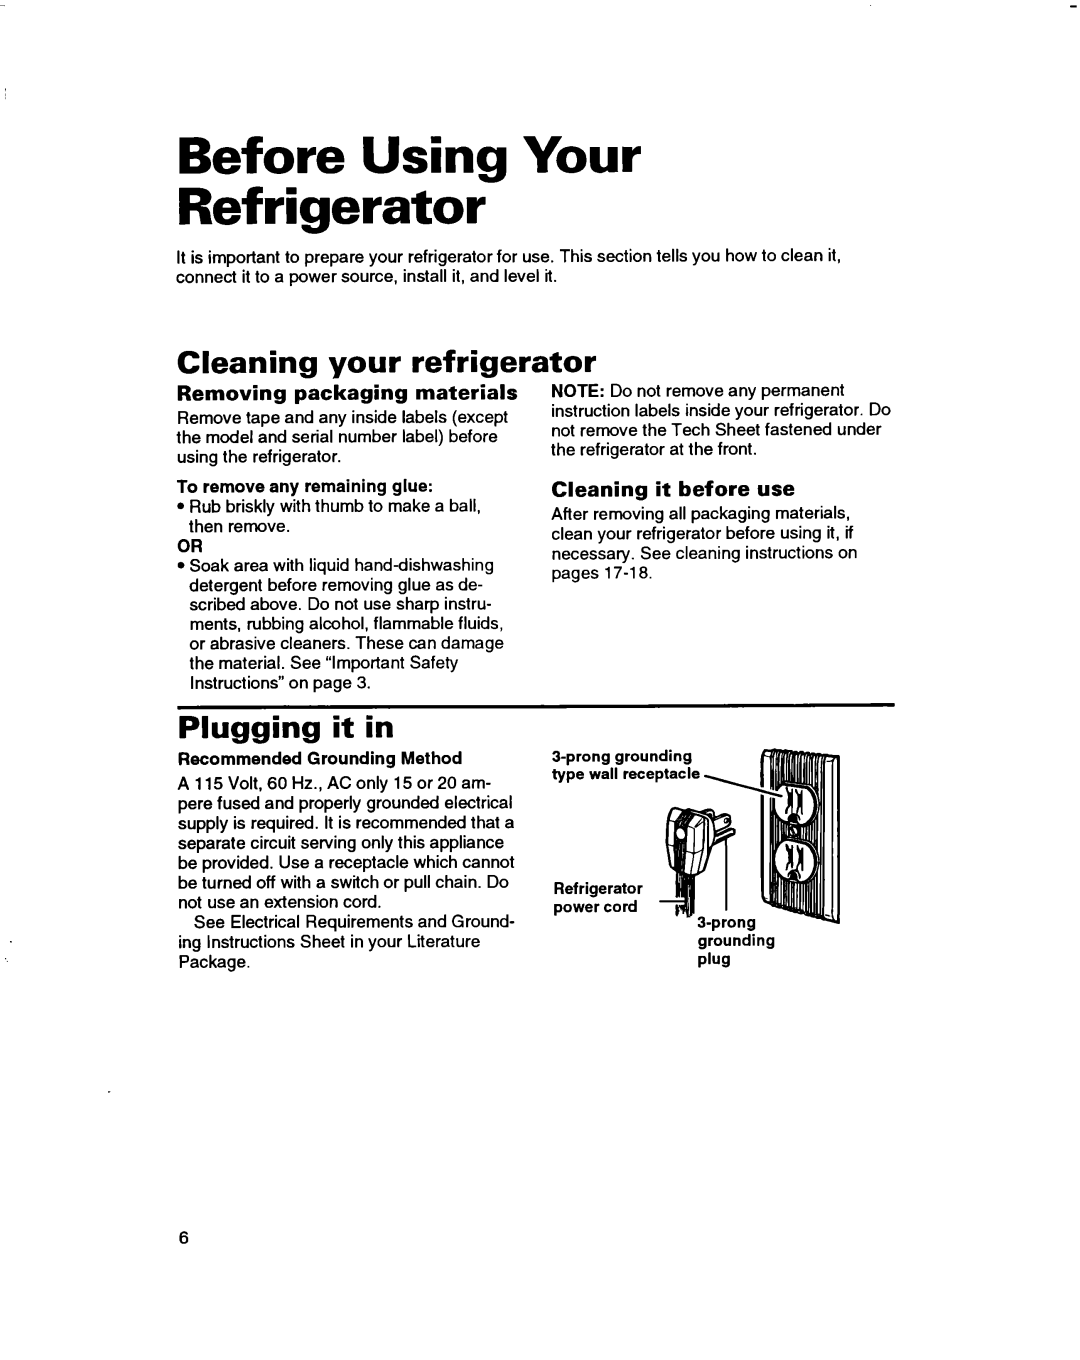 Whirlpool ET14JMXBN00 Before Using Your Refrigerator, Cleaning your refrigerator, Plugging it in, Cleaning it before use 